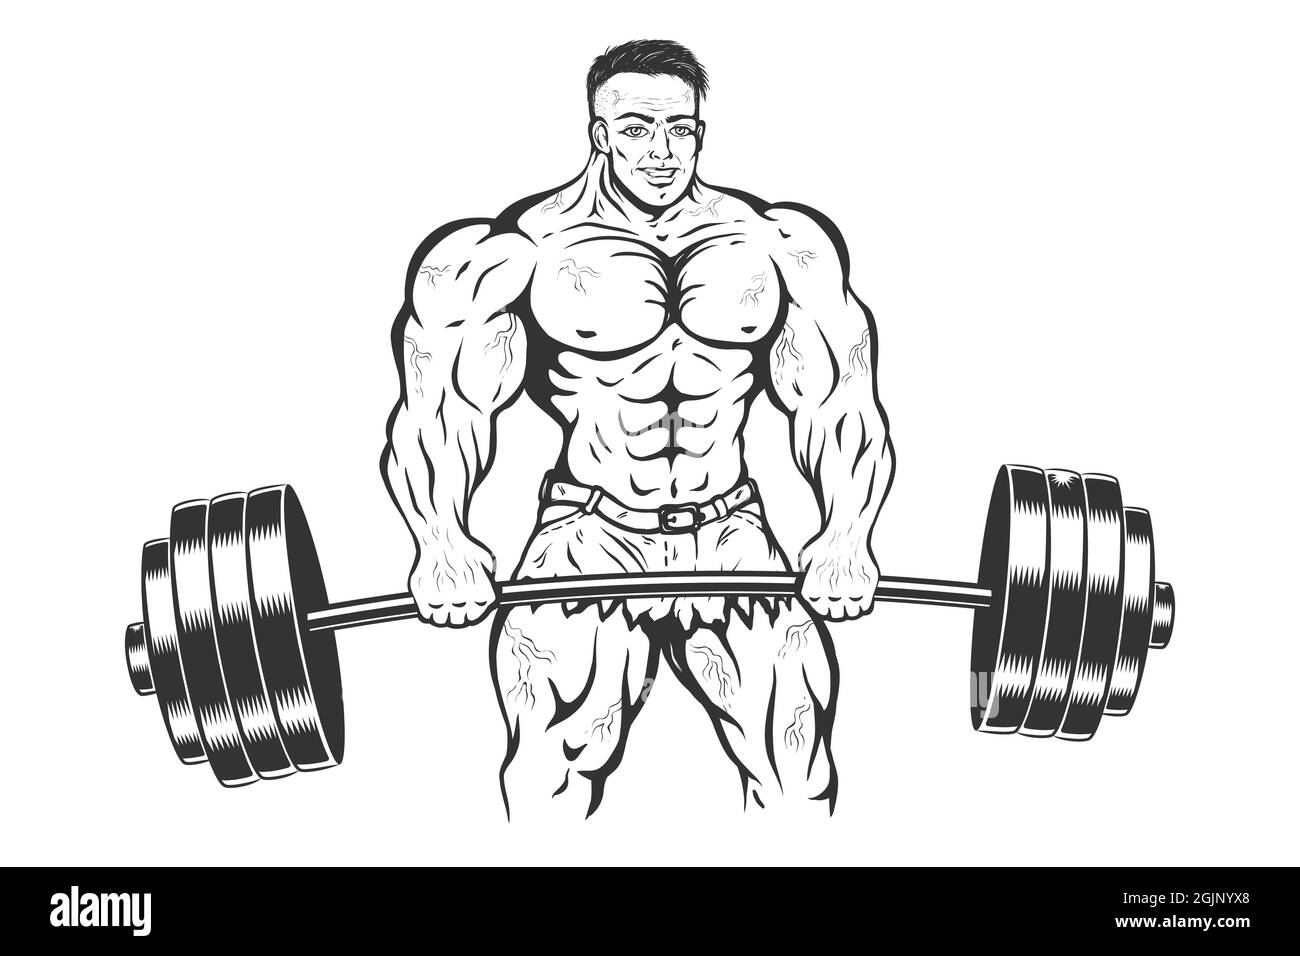 Bodybuilding, Powerlifting, and Weightlifting